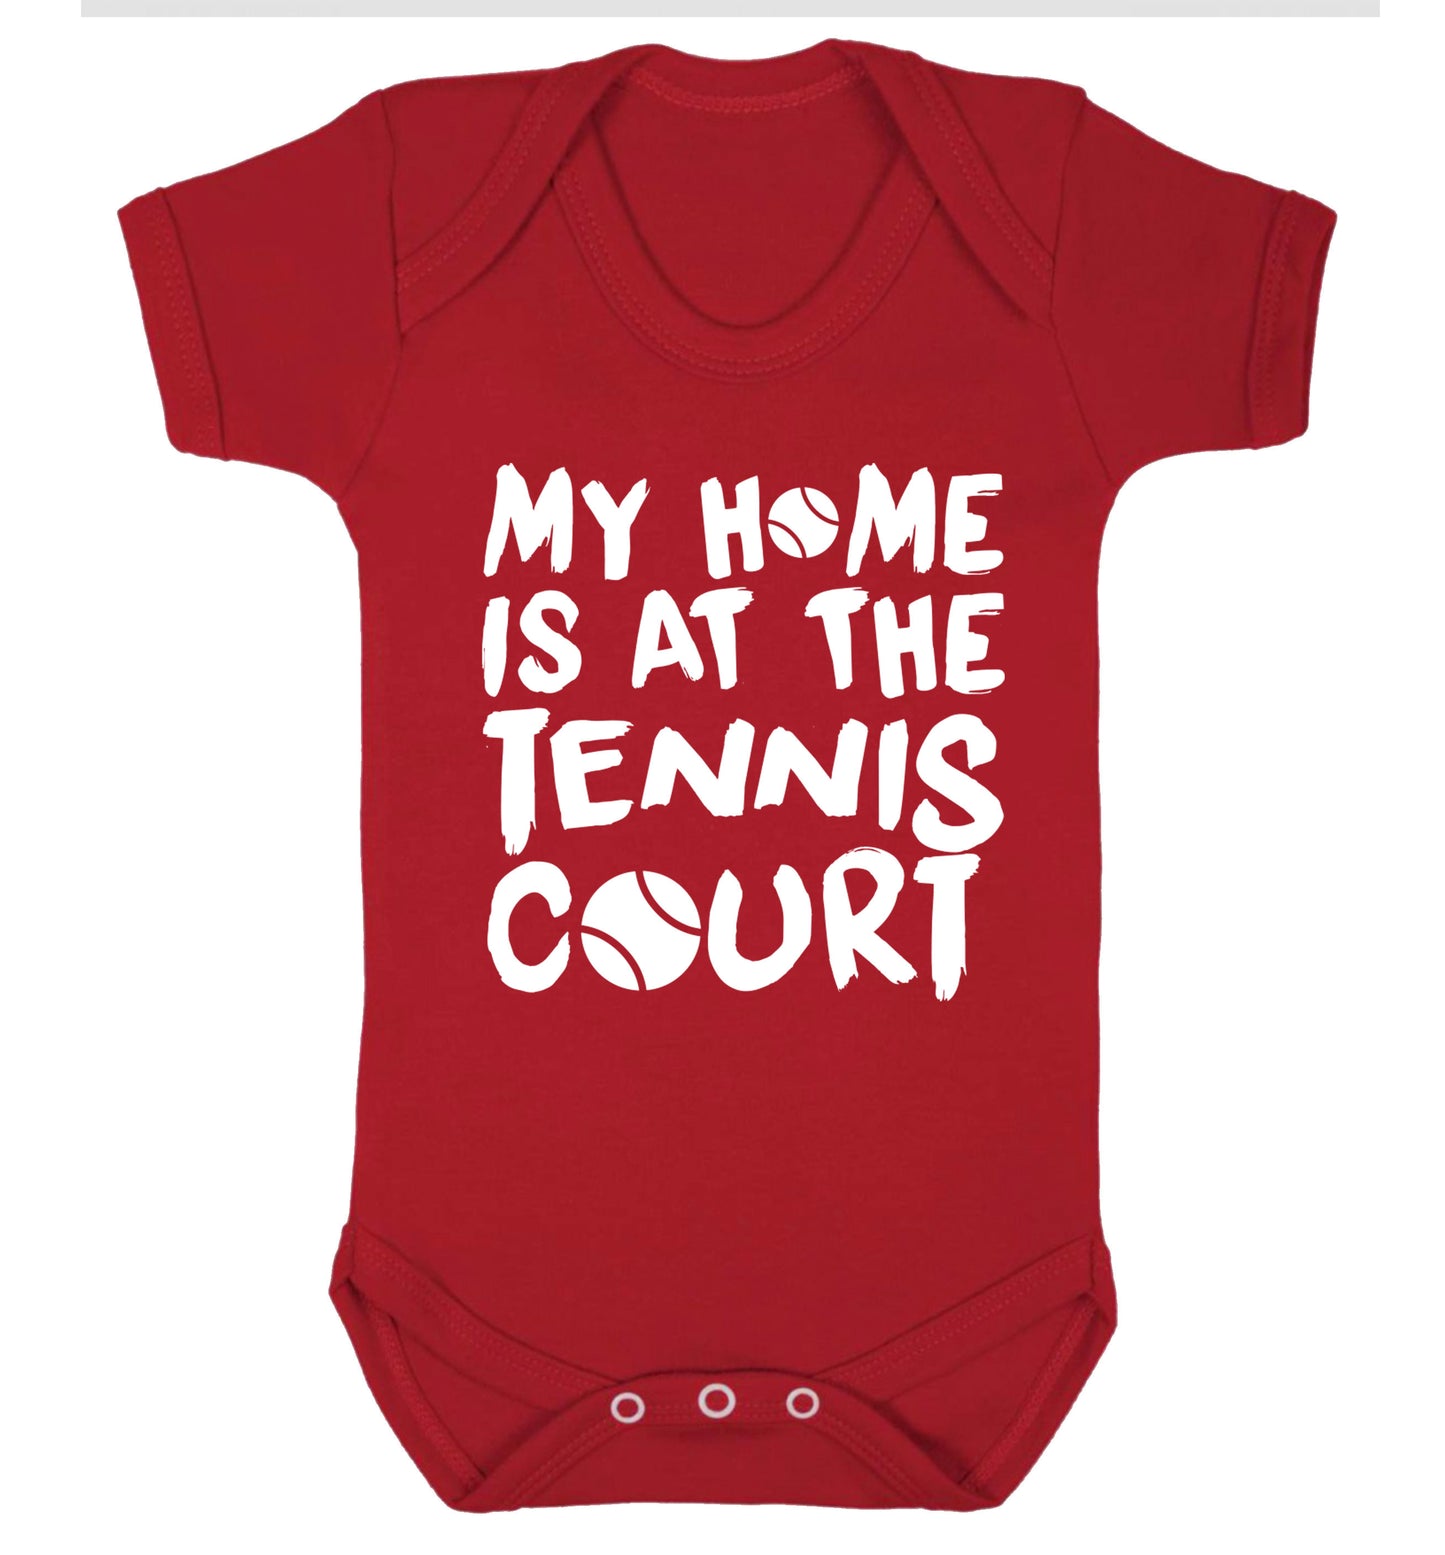 My home is at the tennis court Baby Vest red 18-24 months